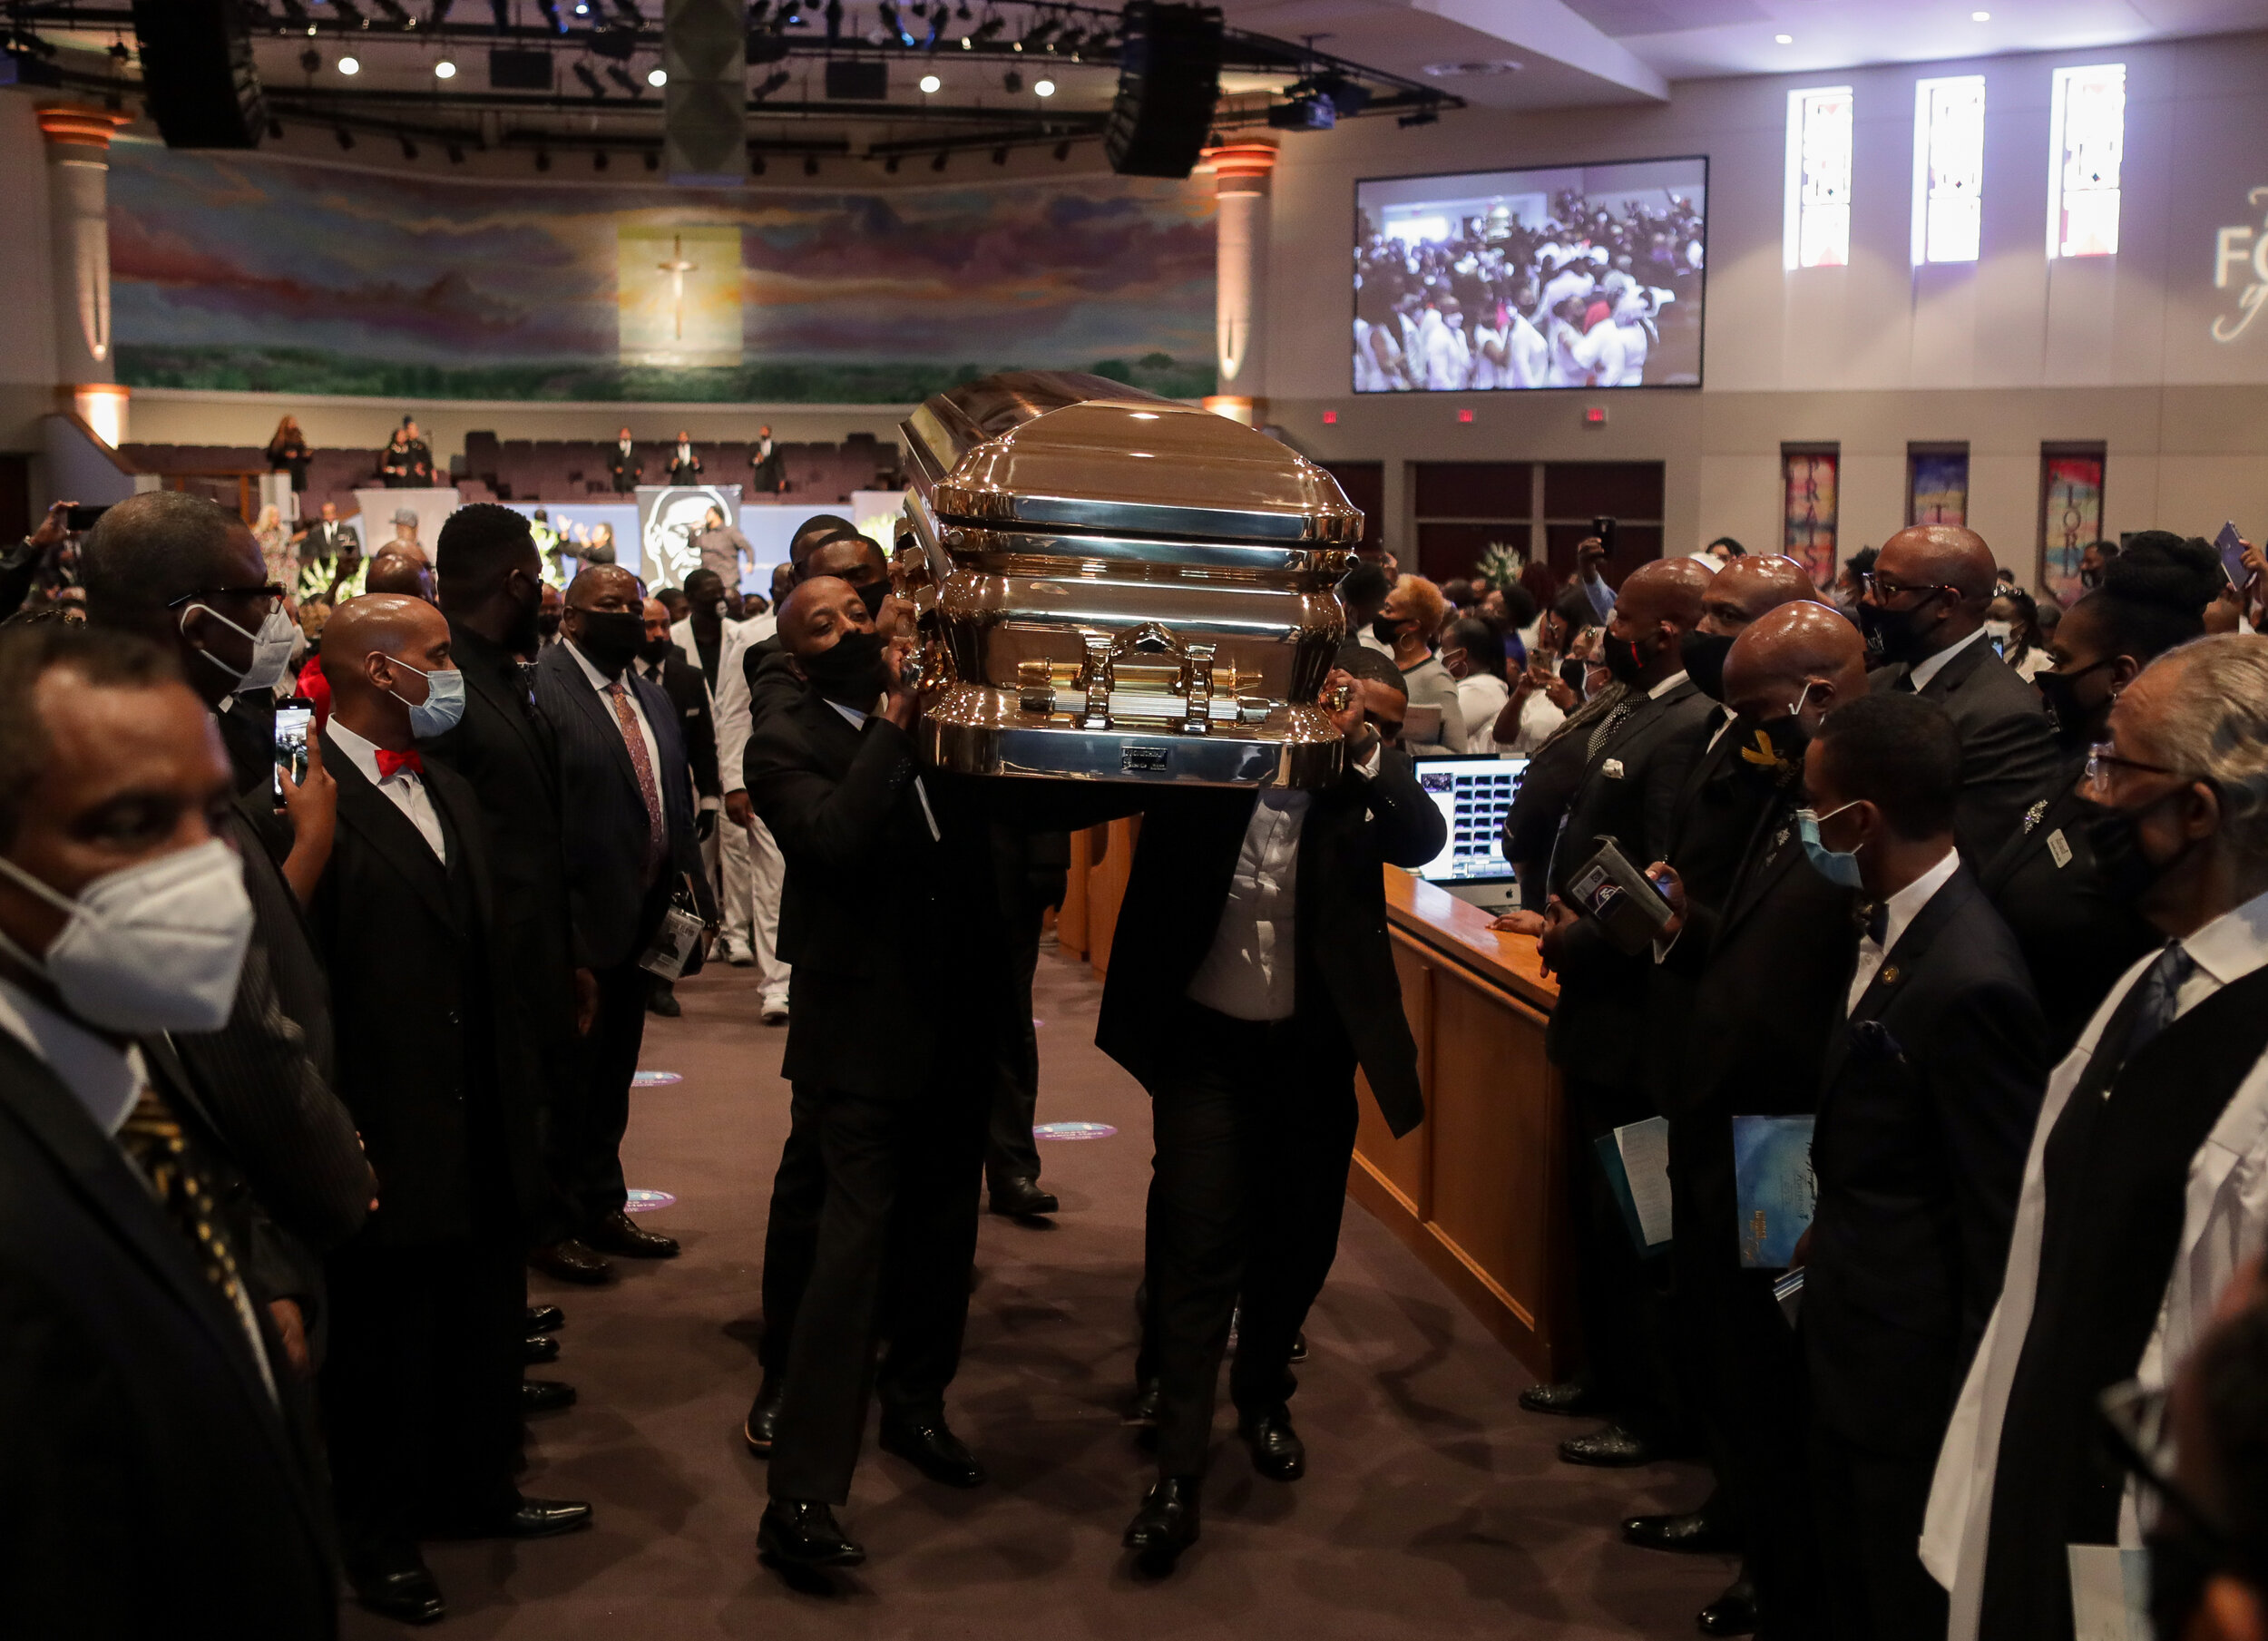  Pallbearers recess out of the church with the casket following the funeral for George Floyd at The Fountain of Praise church on Tuesday, June 9, 2020, in Houston, Texas. Floyd died while in custody of the Minneapolis Police Department, after officer